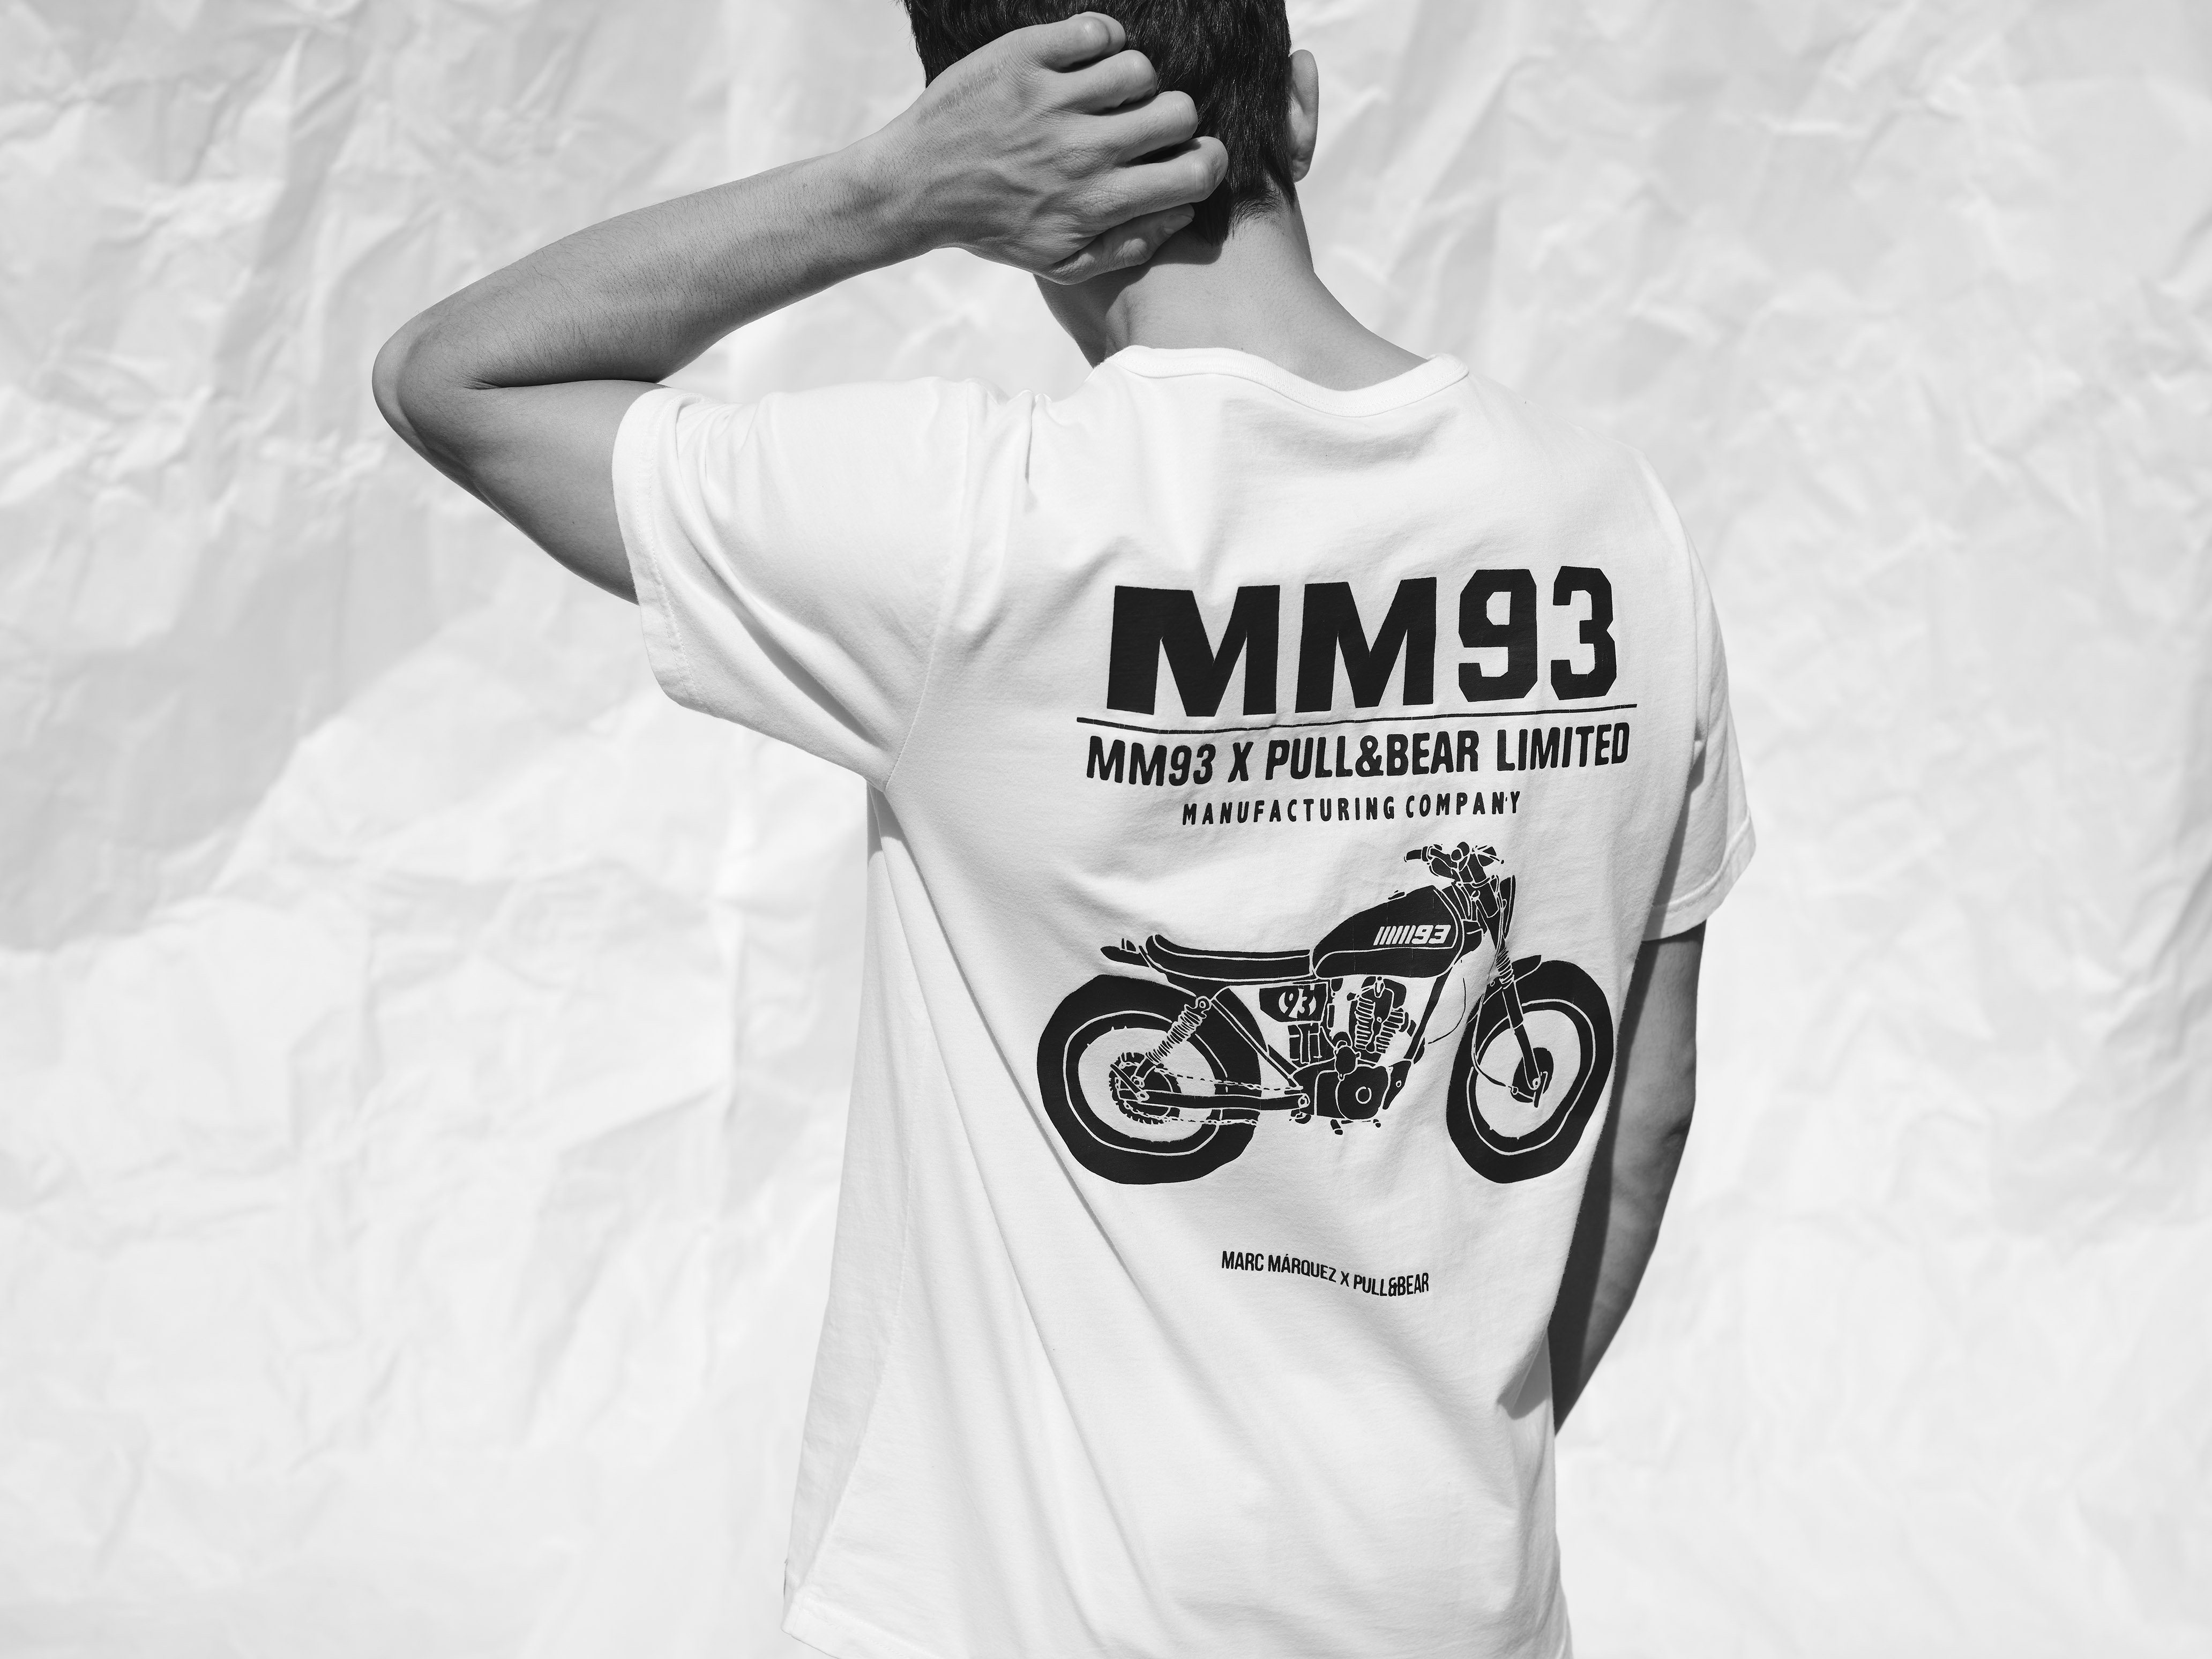 Pull&Bear x Marc Márquez New Collection Inspired The MotoGP Champion - RESPECT. | The Photo Journal of Culture